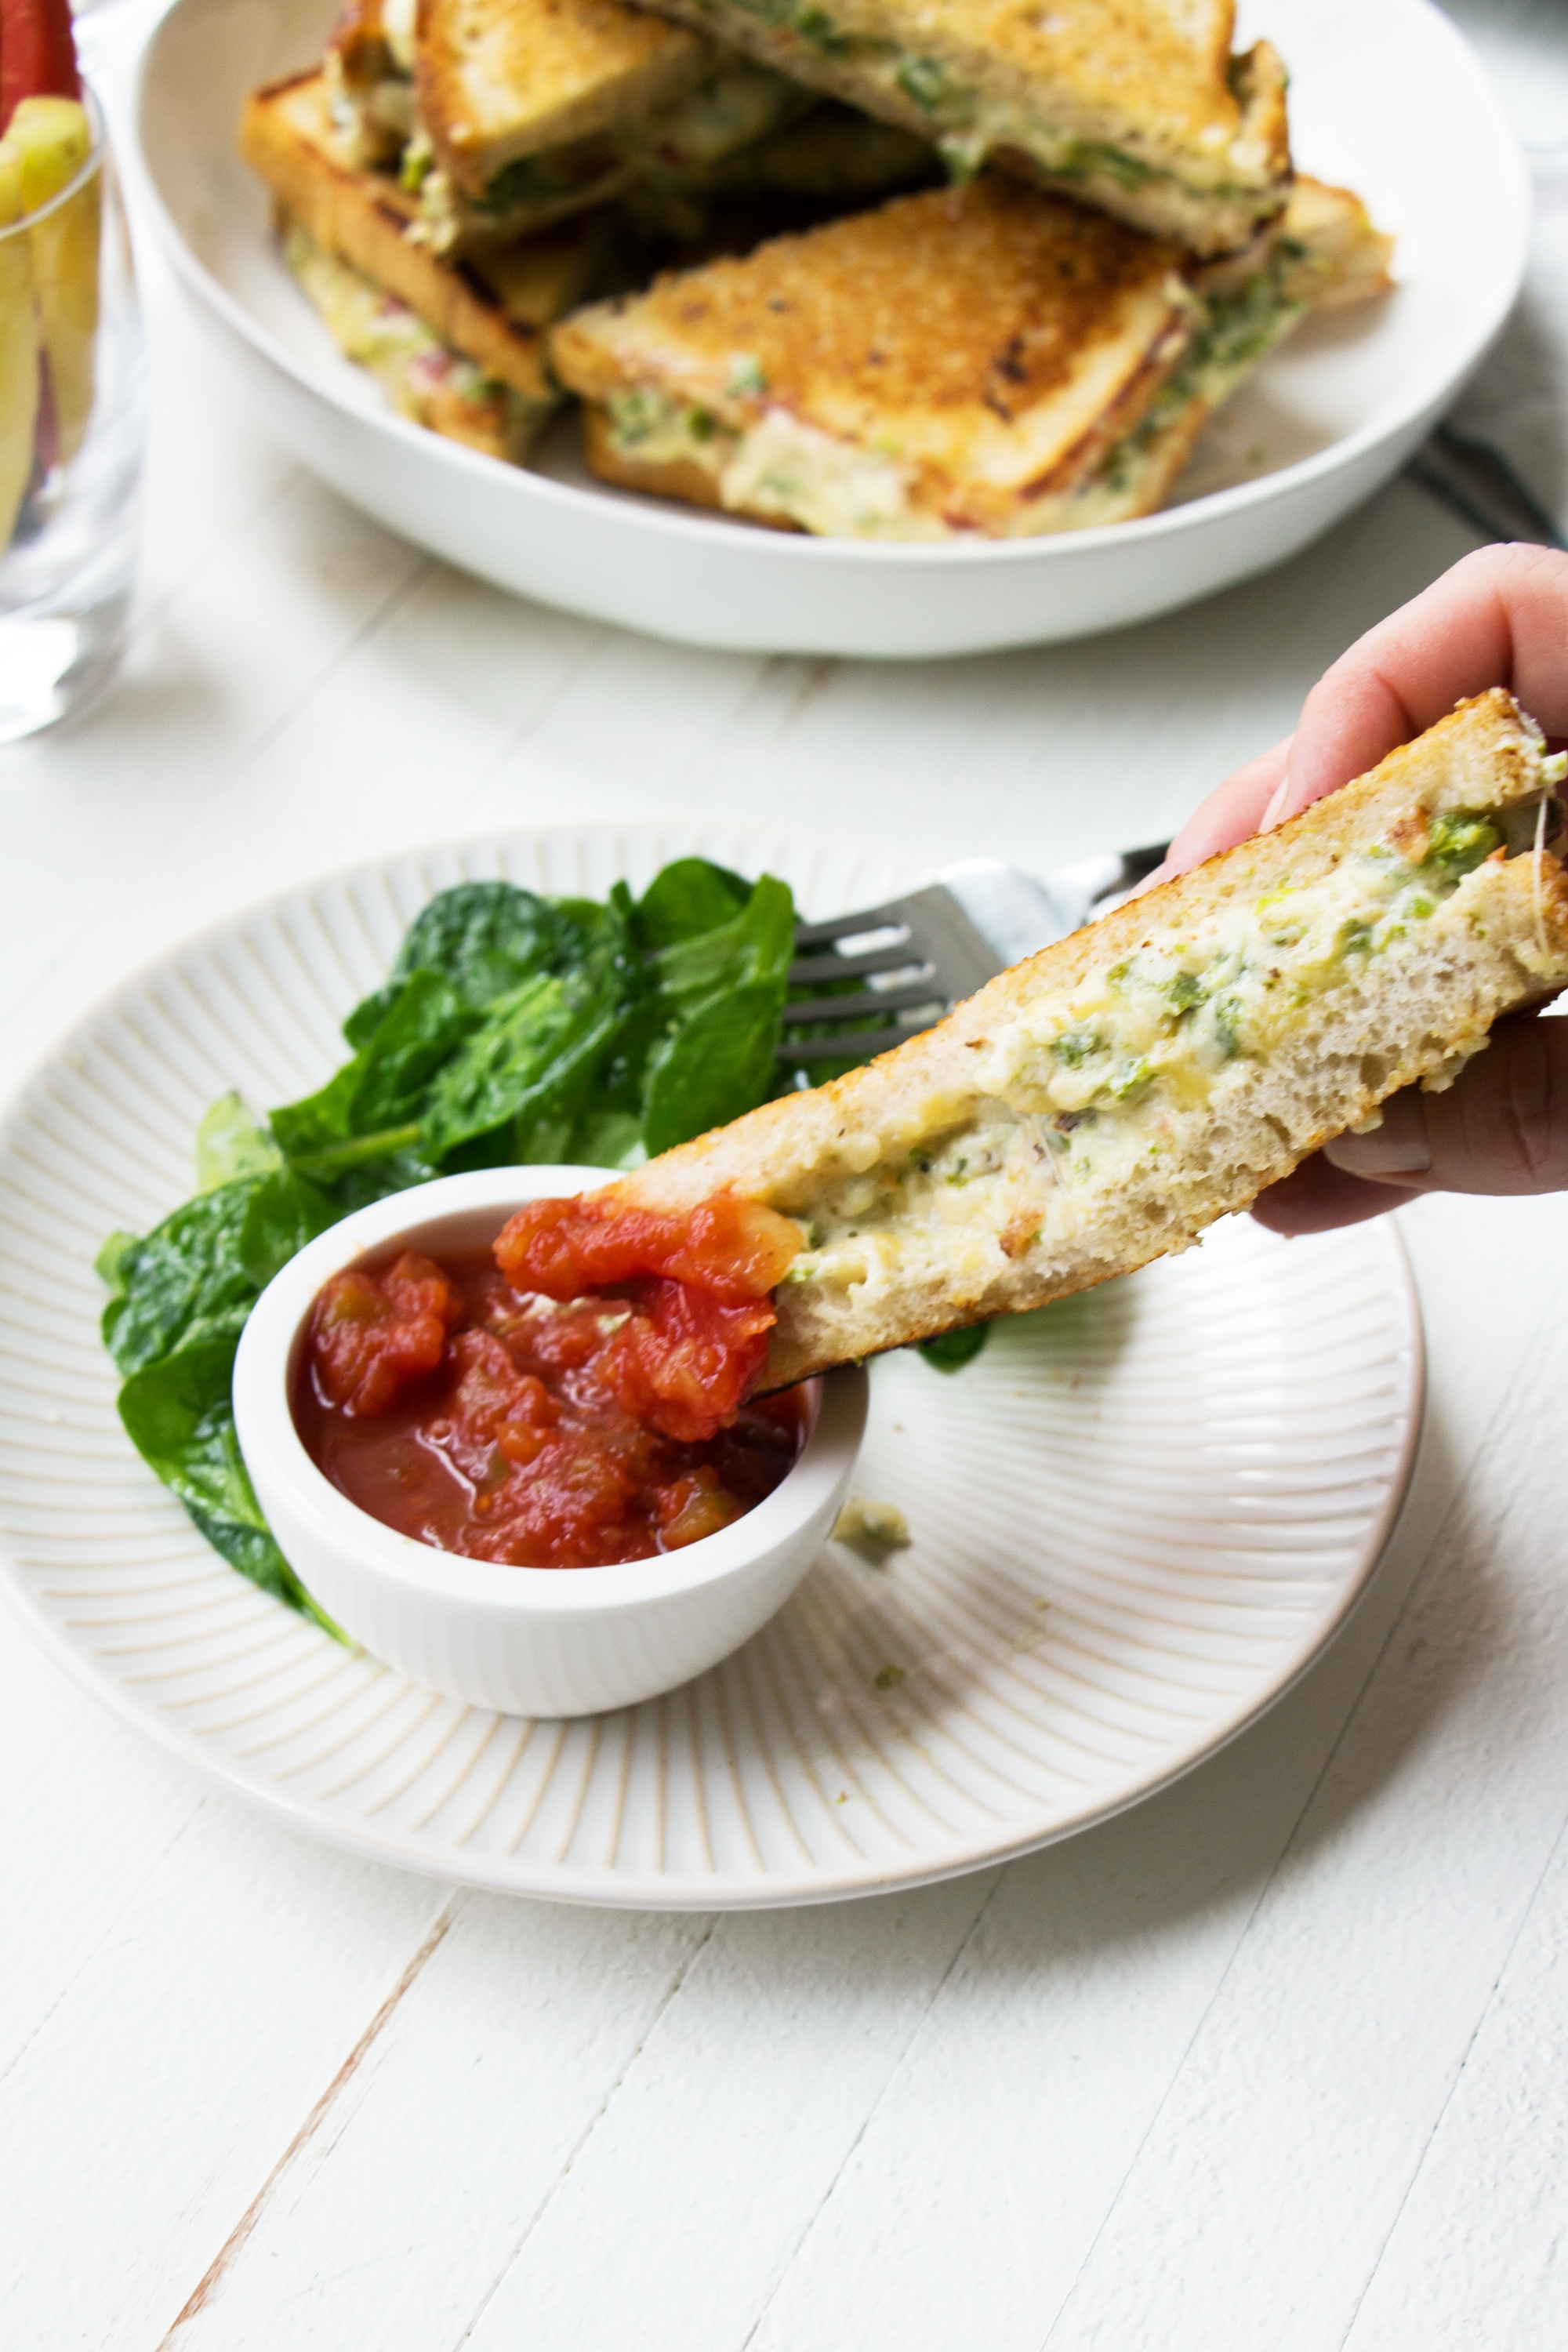 Jalapeno Popper Grilled Cheese sandwich dipping into salsa.